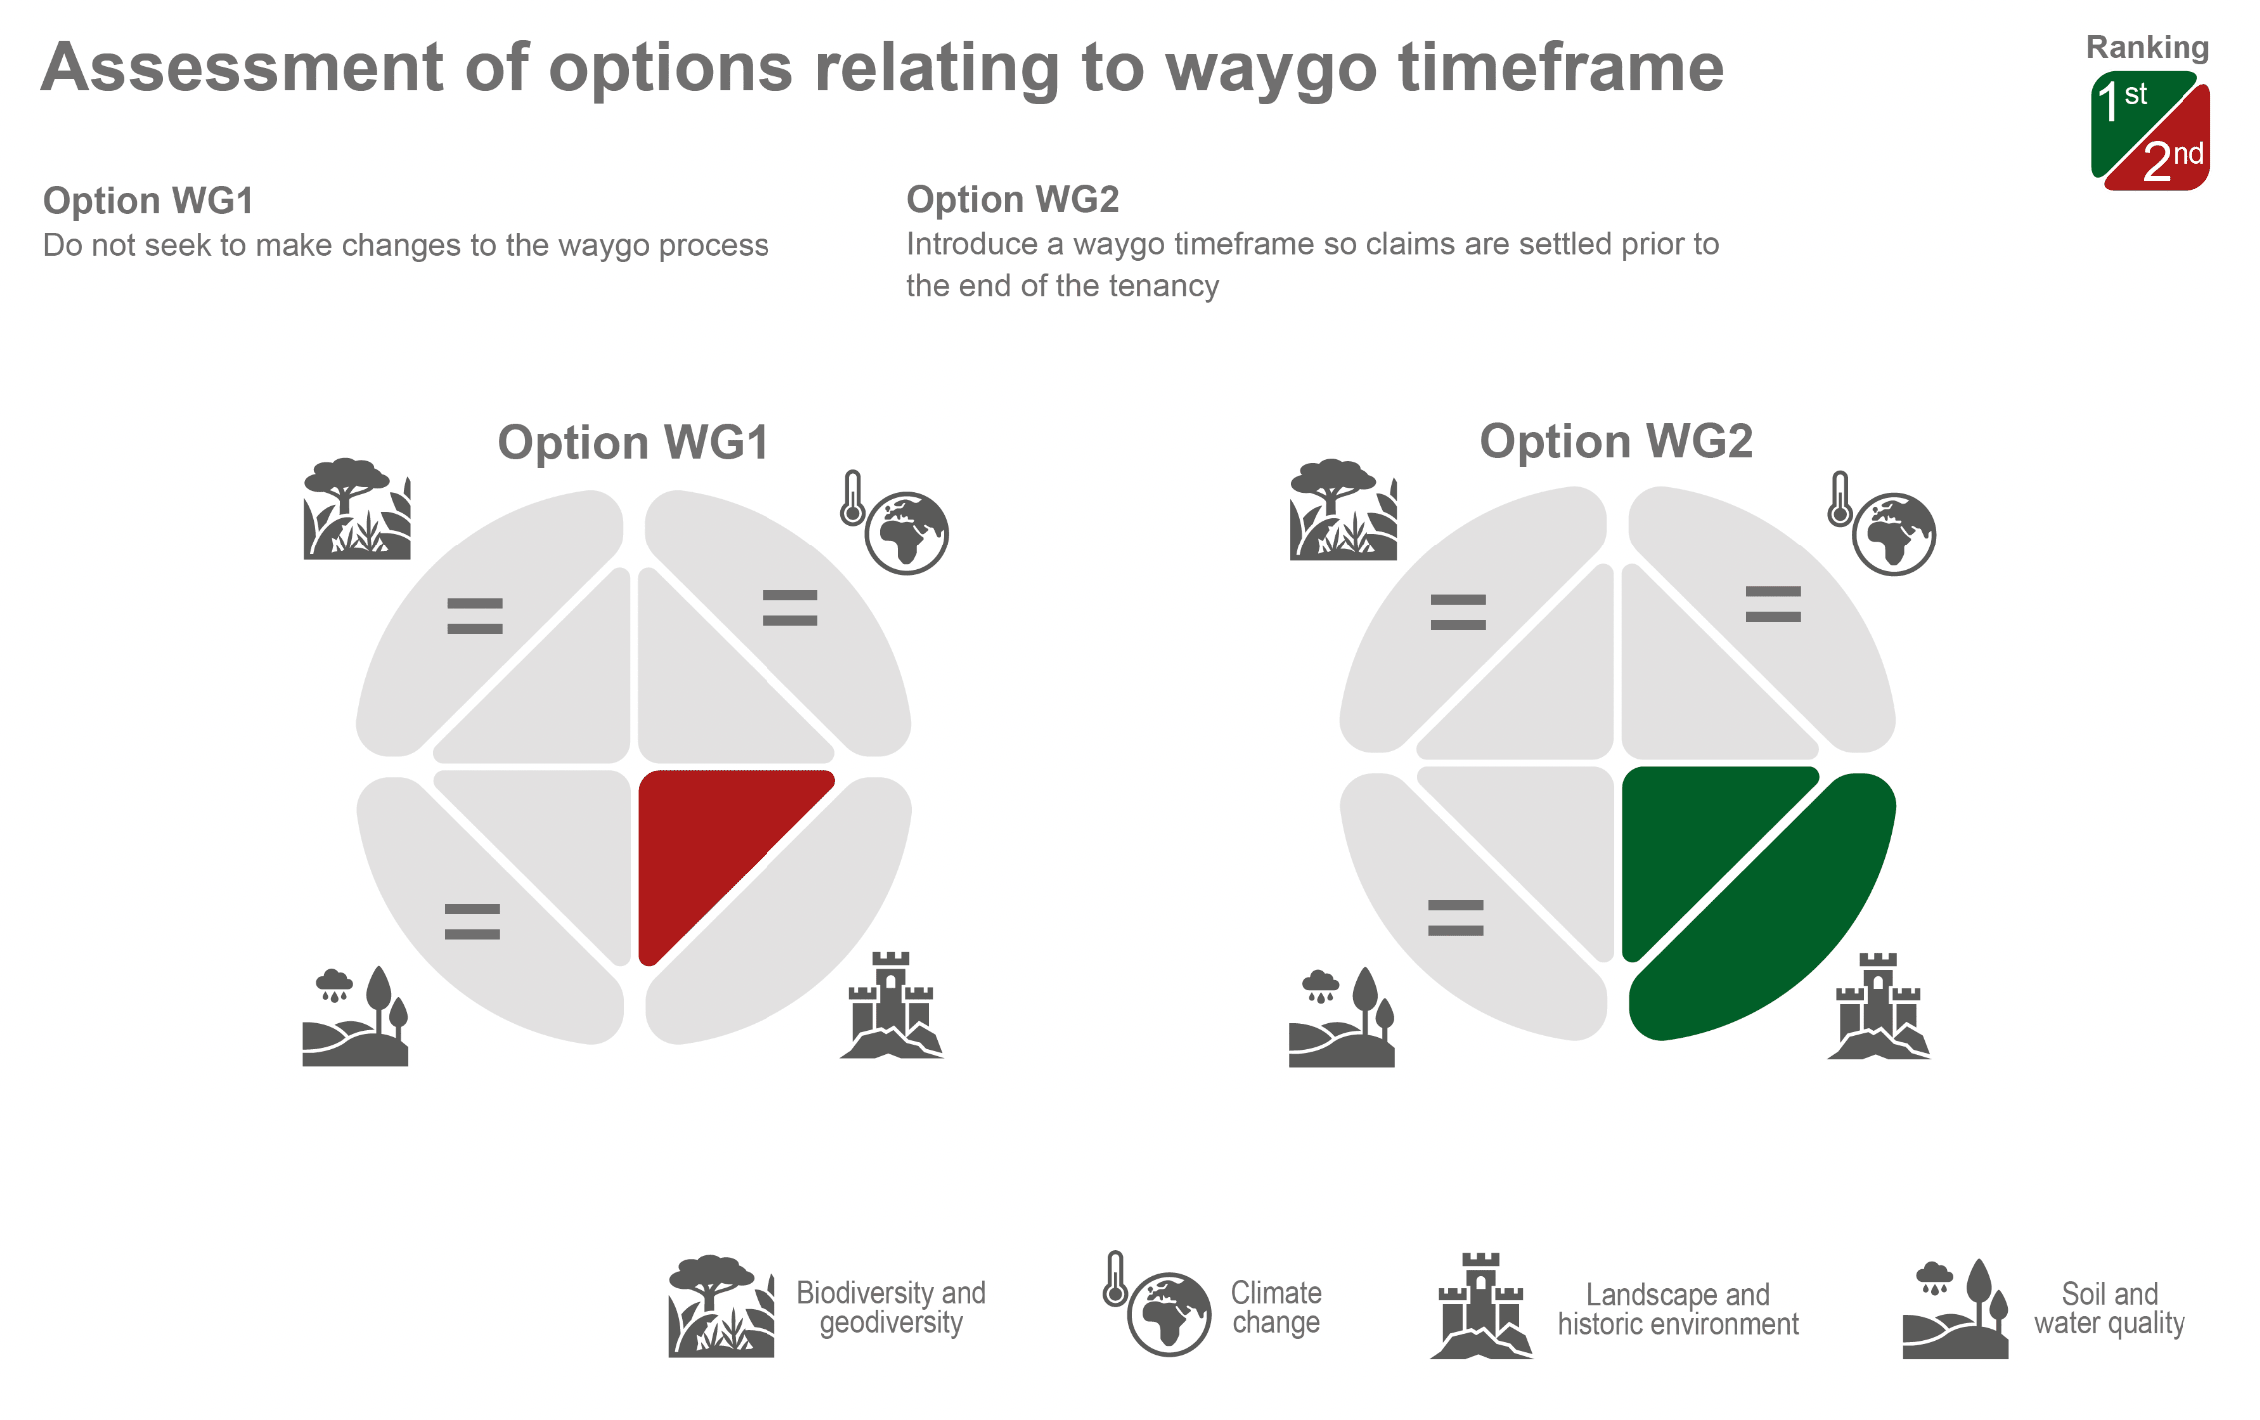 Infographic showing the assessment results of the two options relating to waygo timeframe.  Option WG1 and Option WG2 perform equally; each option ranks first for one SEA topic, and are ranked equally under three SEA topics.